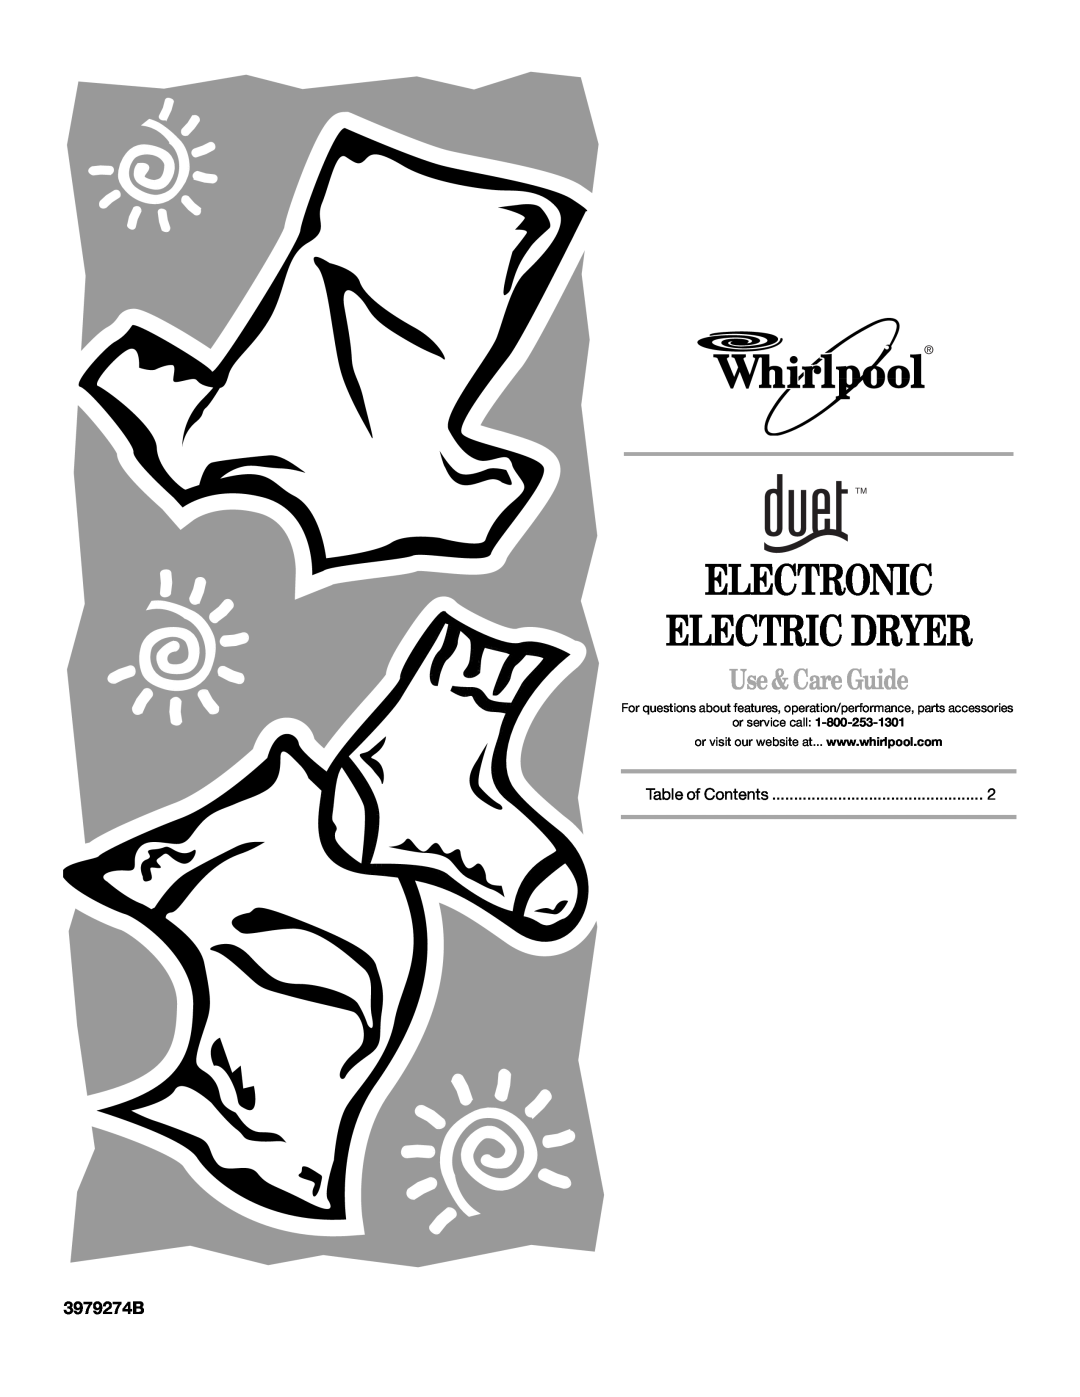 Whirlpool GEW9200LQ0 manual Electronic Electric Dryer, Use & Care Guide, 3979274B, or service call 